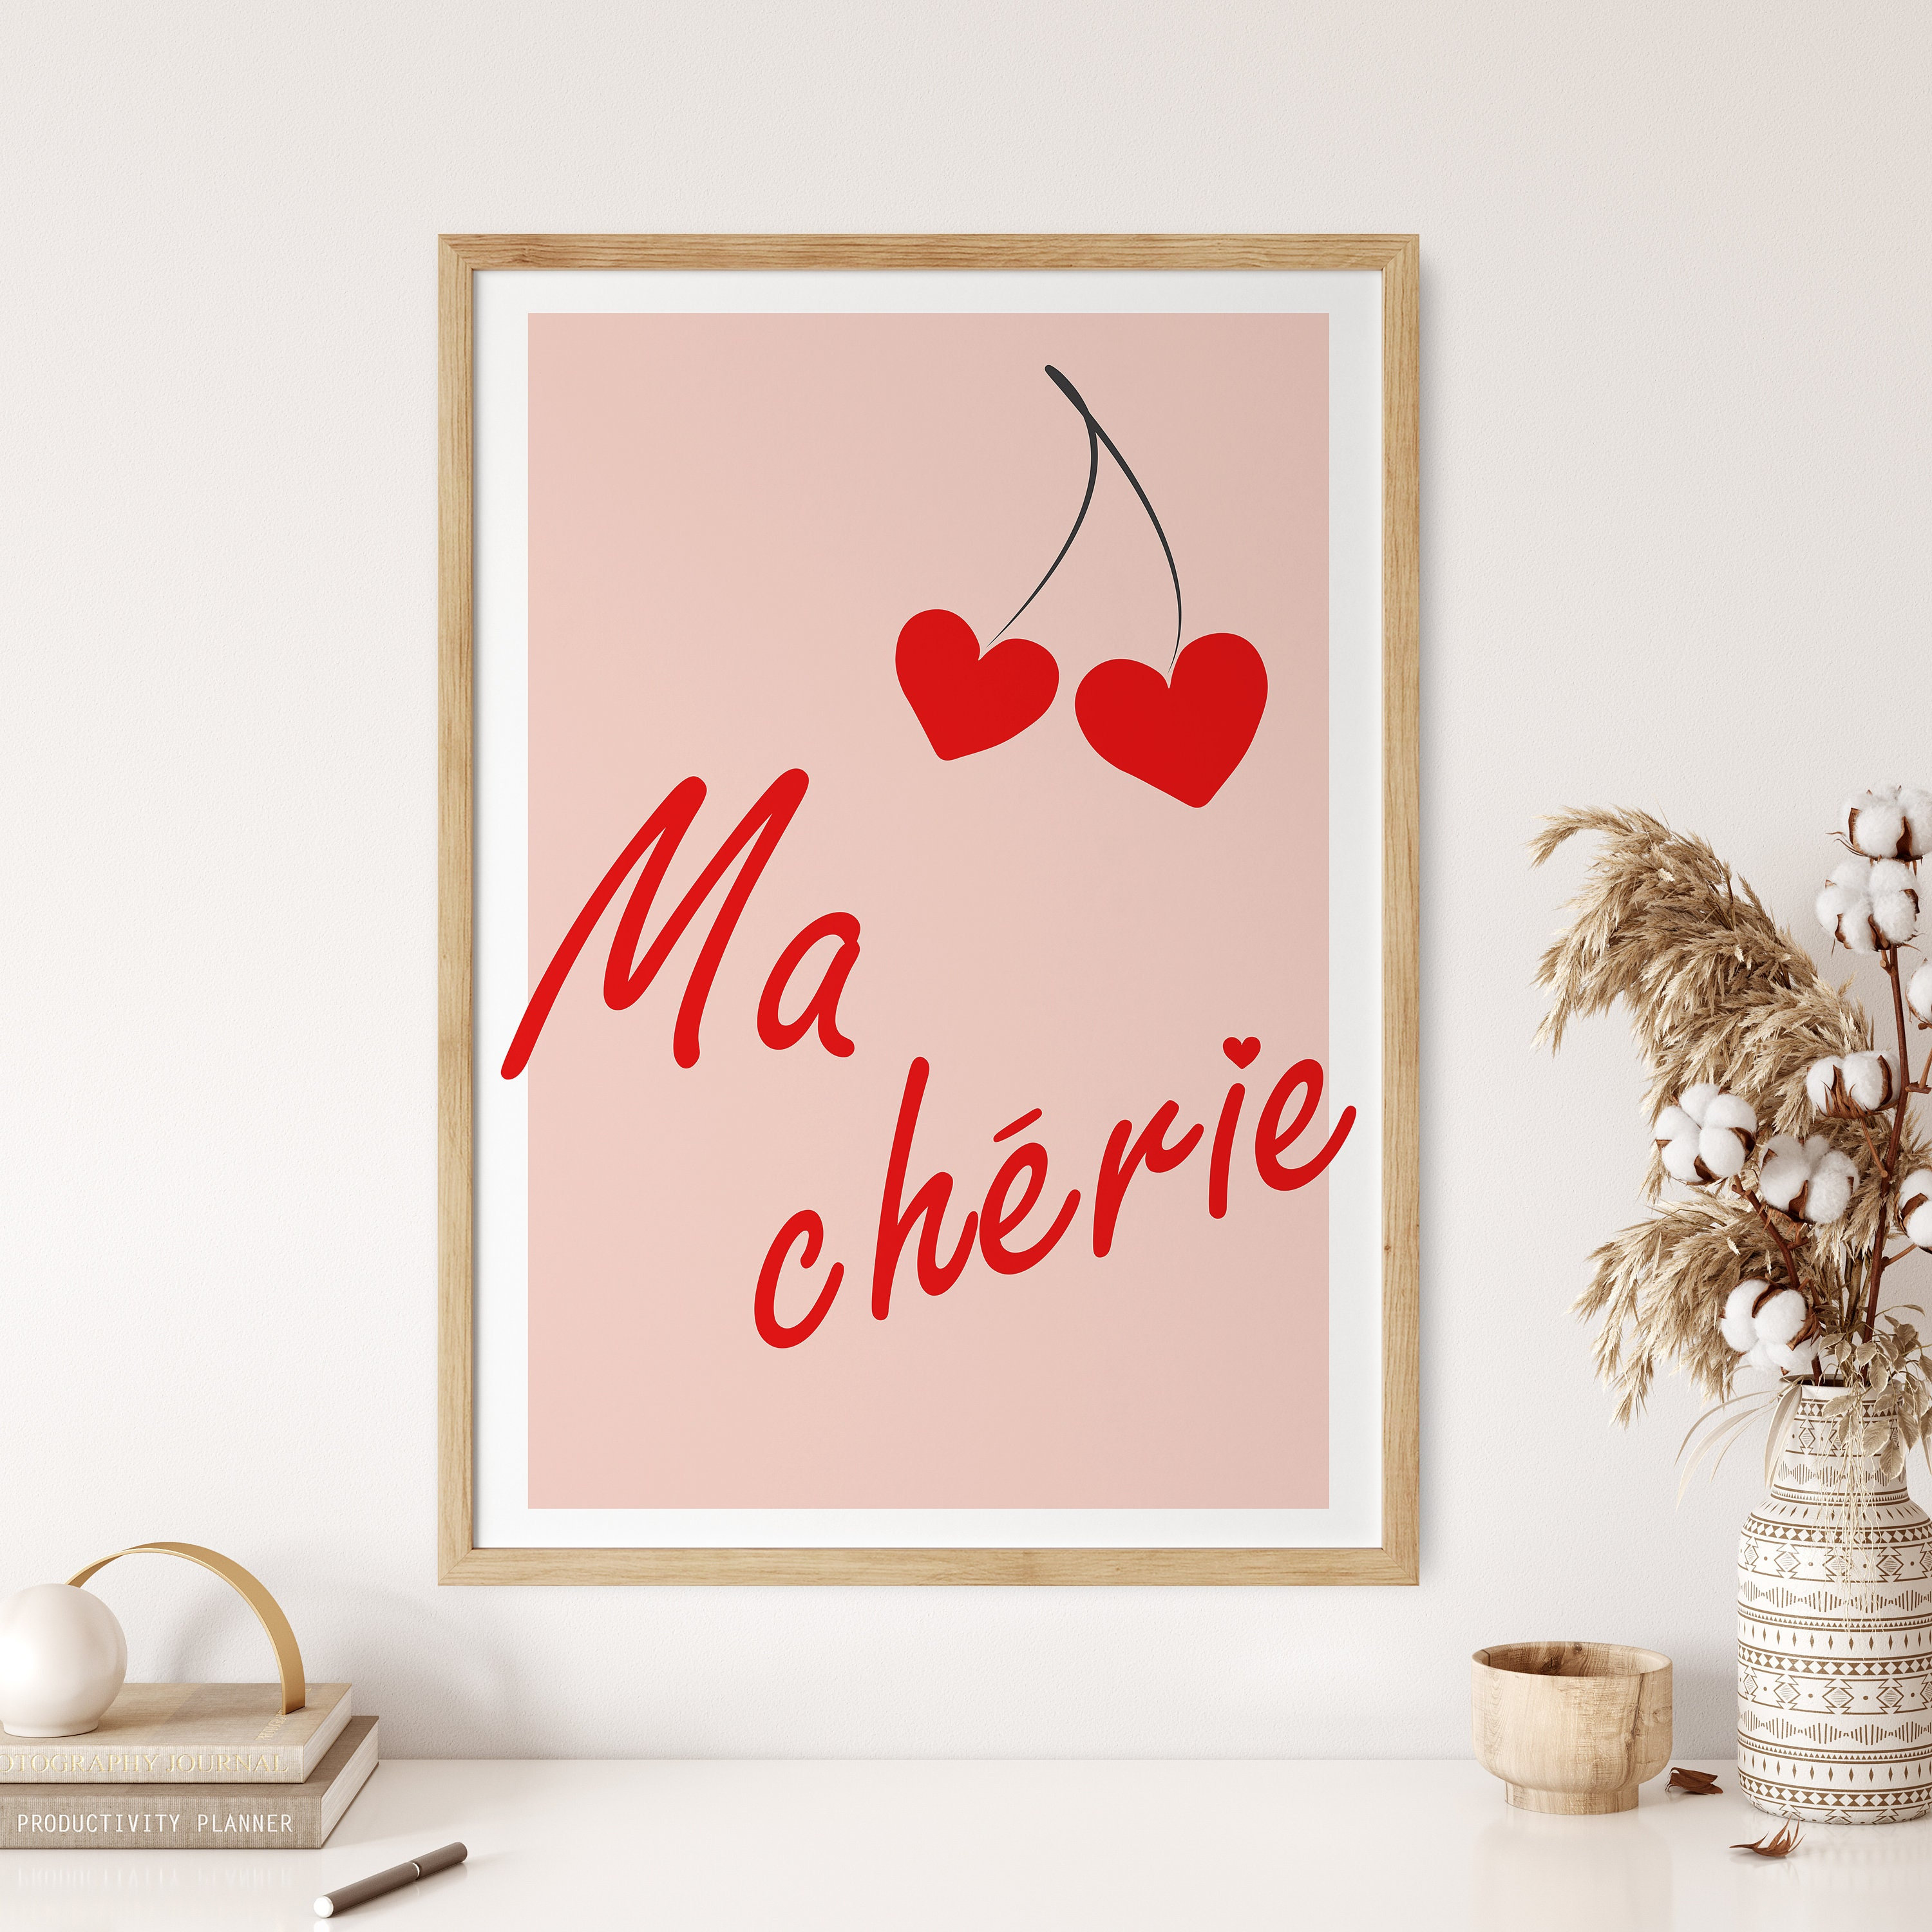 Coquette Room Decor, Ma Cherie Coquette Metal Wall Art for Apartments, Coquette Aesthetic, Maximalist Wall Art, Girly Trendy Wall Art